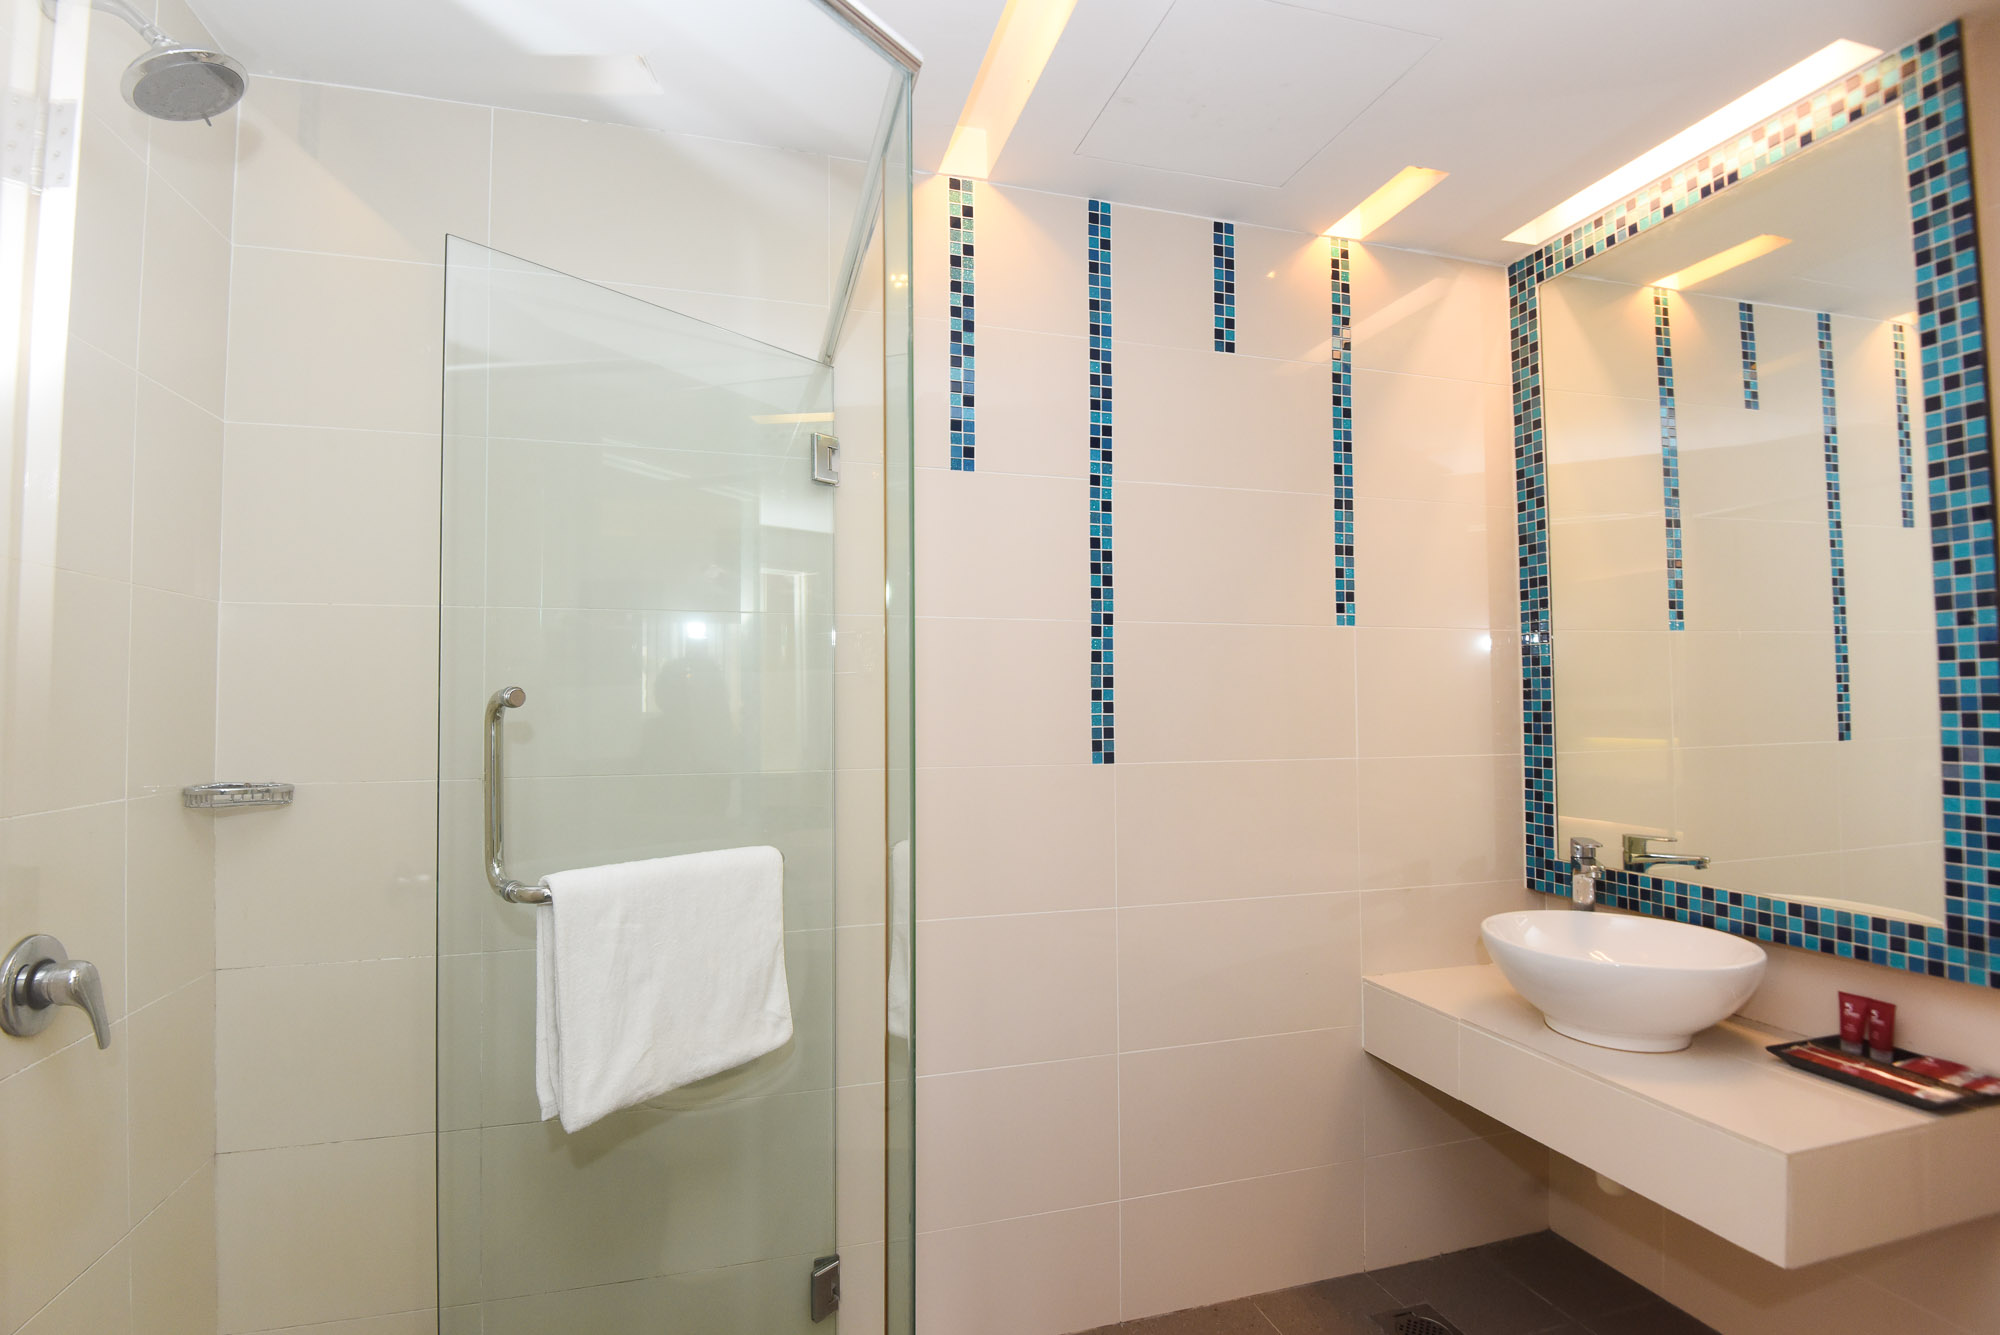 Step into the serene water inspired Water Suite. Be calm as water as you rest yourself in this room filled with amenities such as air-conditioned, shower facilities, complimentary WiFi, in-room safe and many more